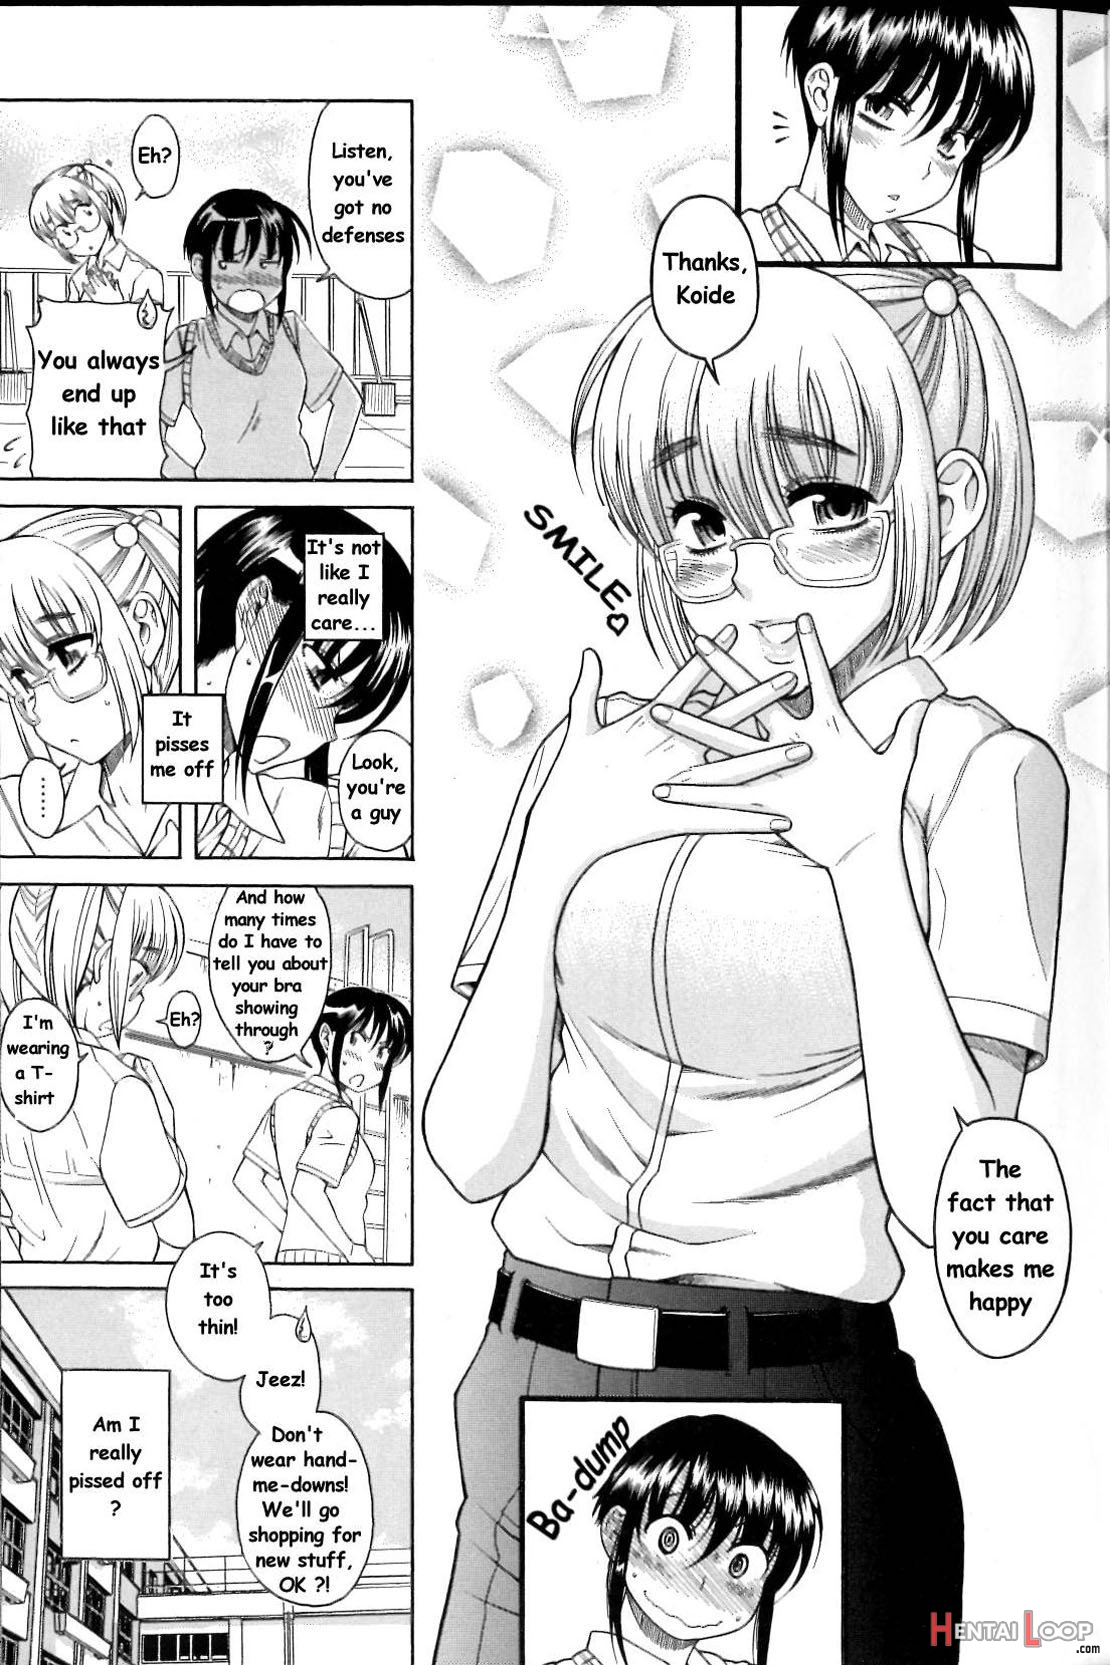 Boy Meets Girl, Girl Meets Boy 2- Single Page Version page 9